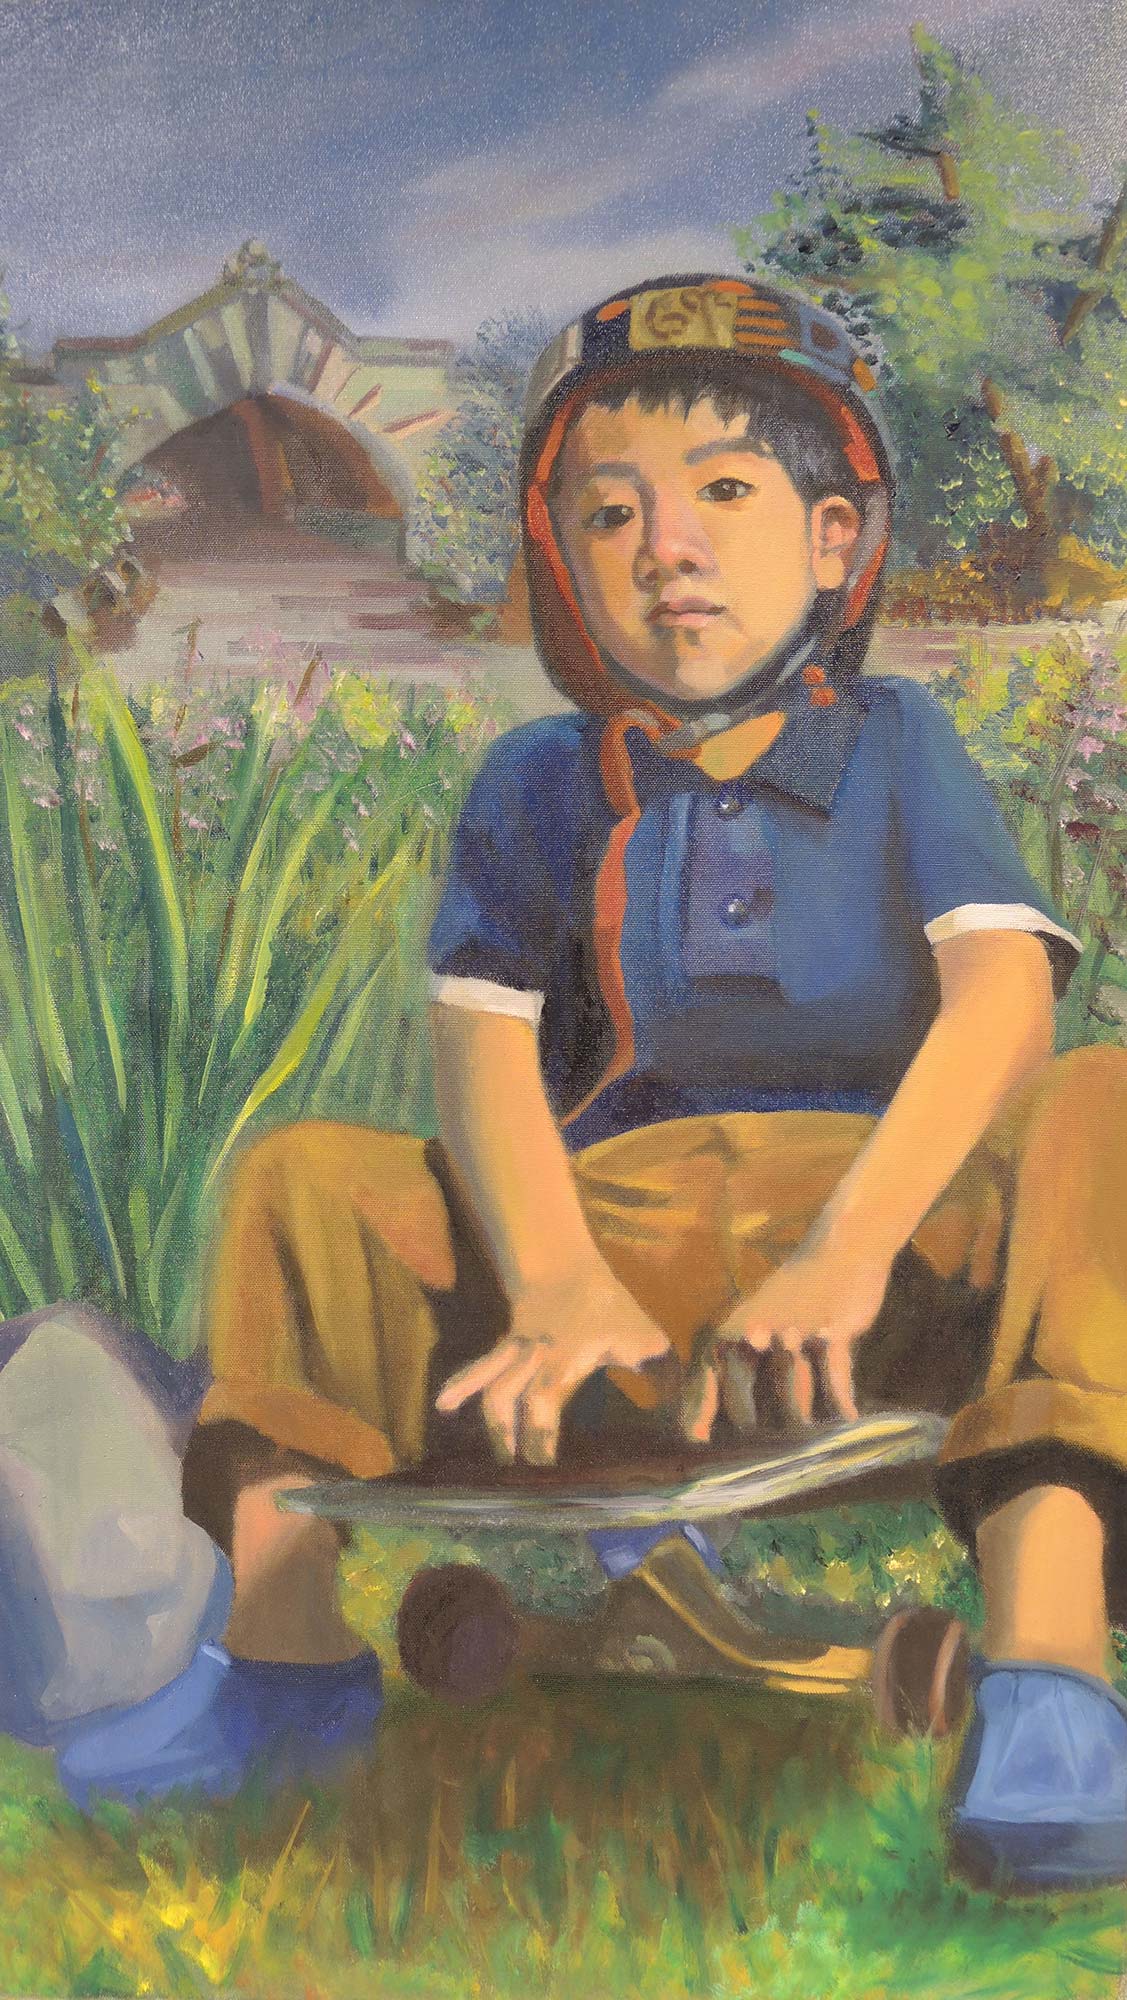 A painting by Robert Gomez of a child sitting on a skateboard